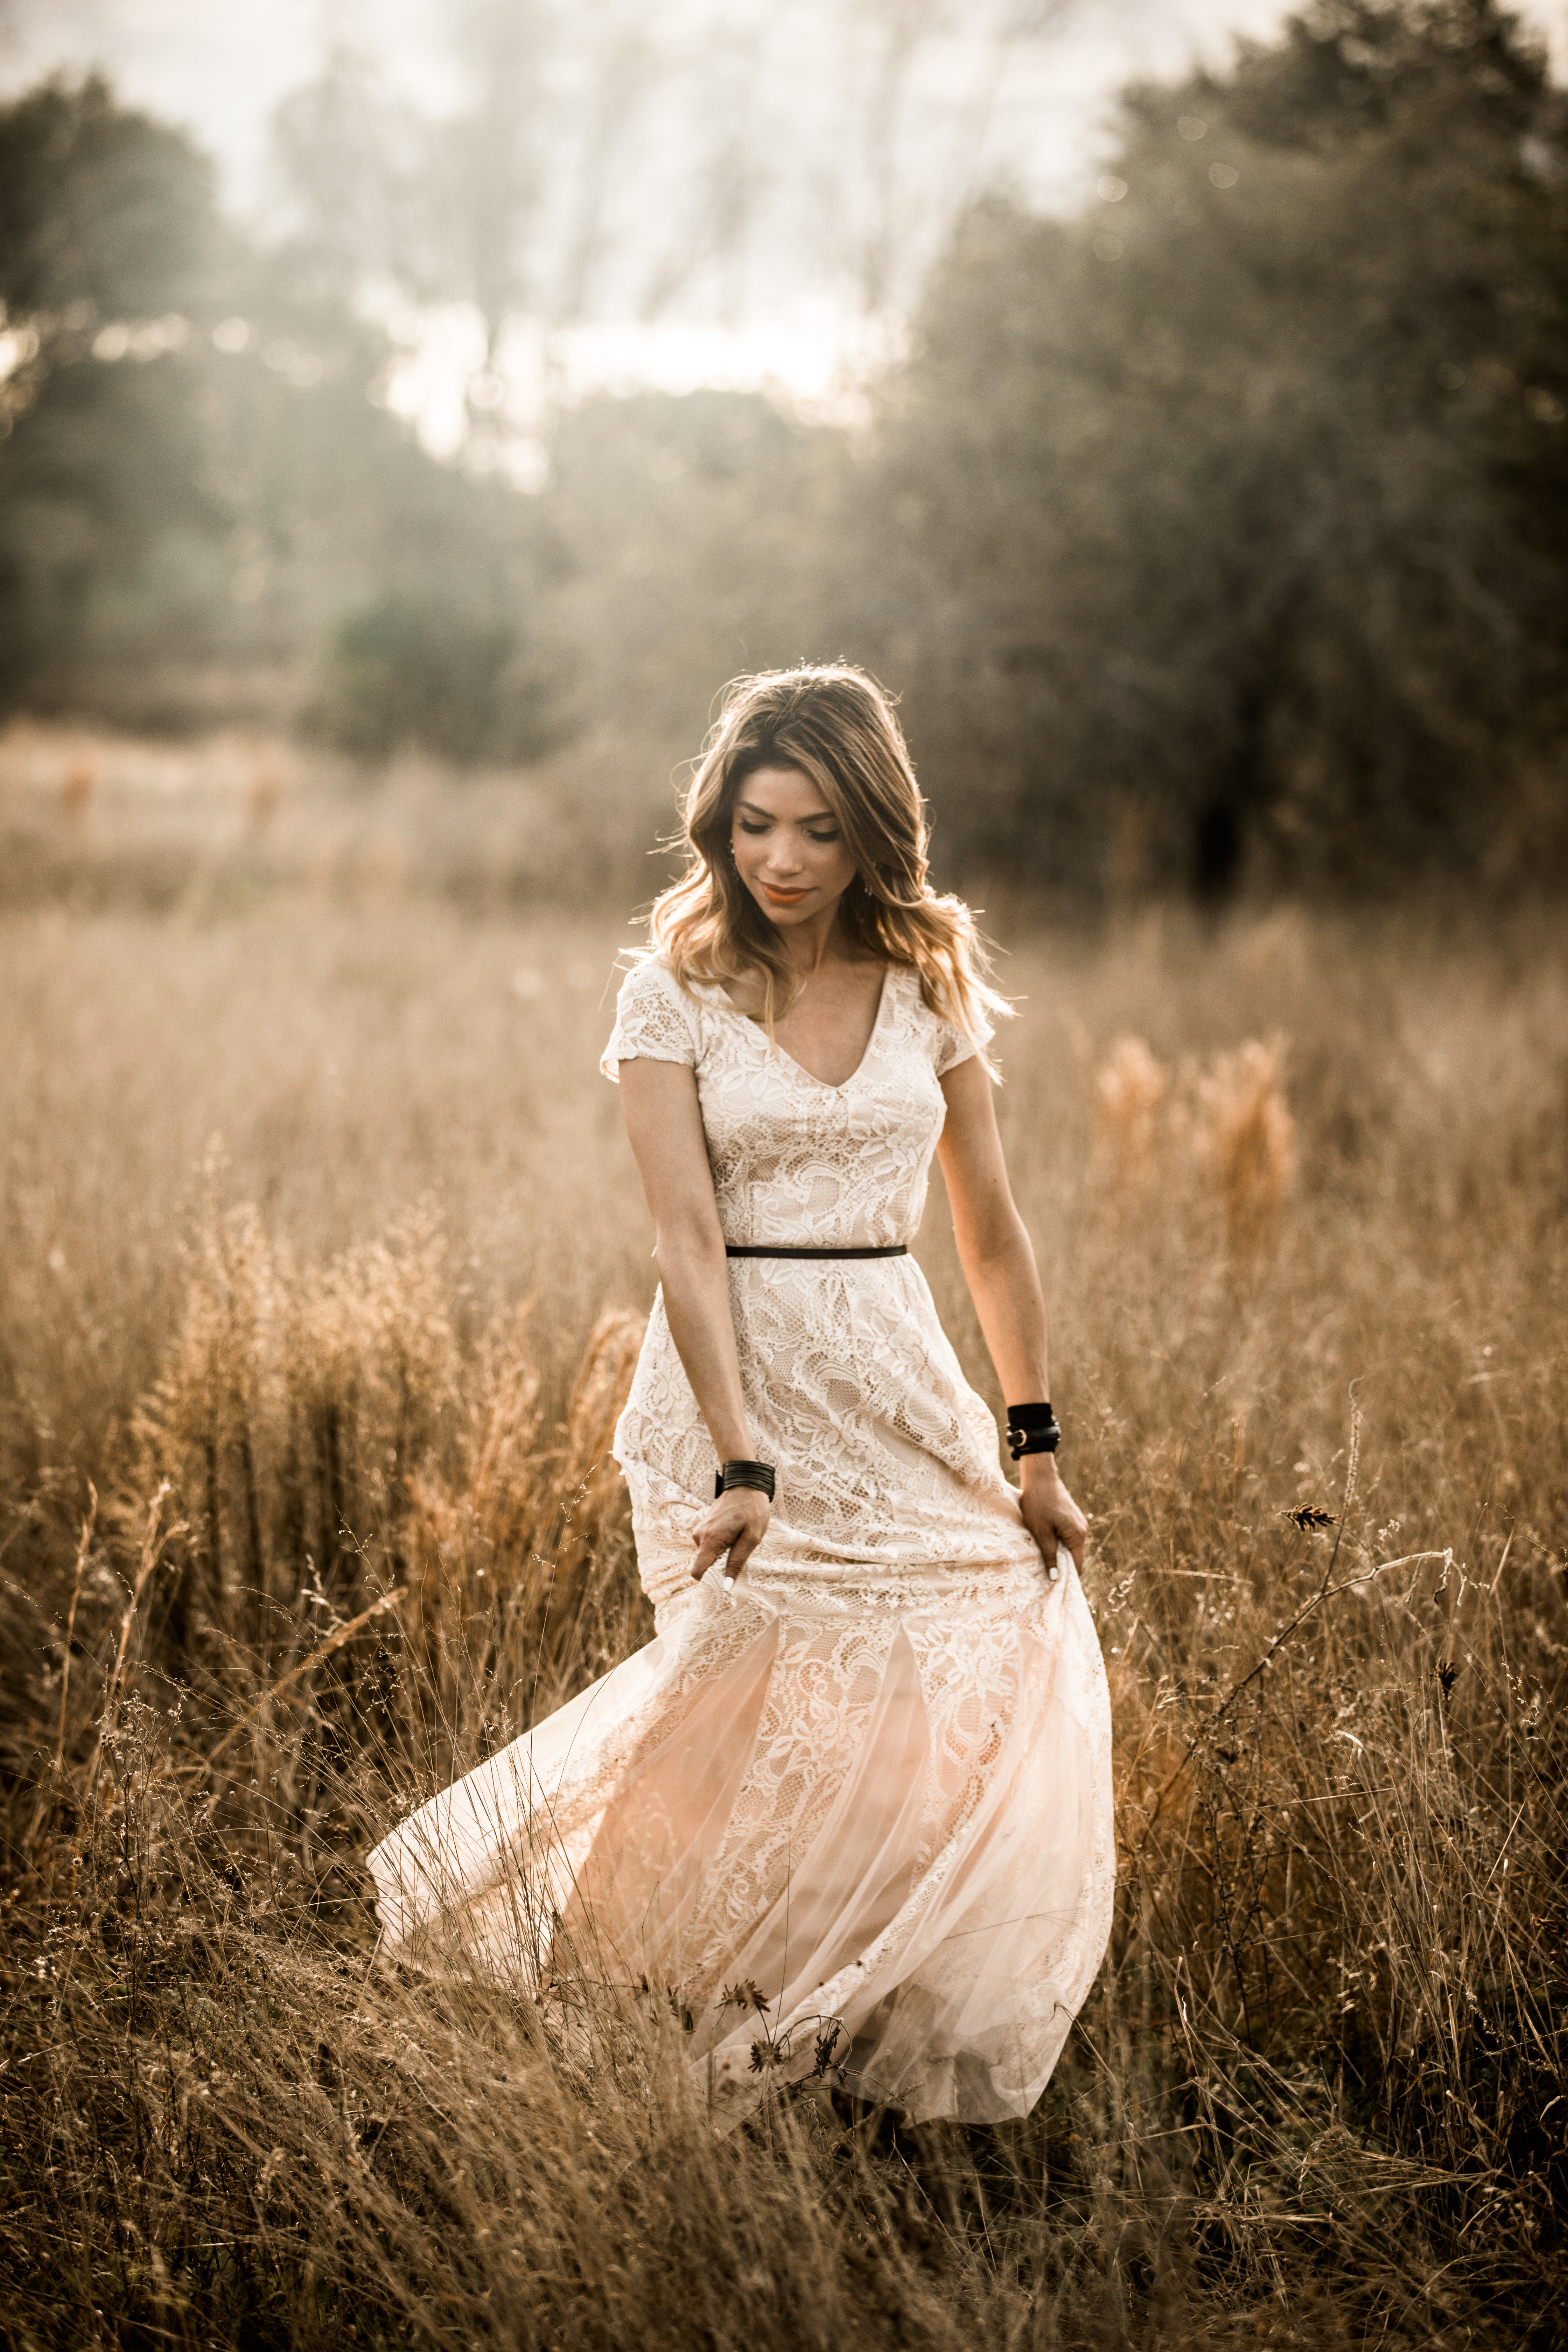 How to Shoot Natural Light Portraits in Flower Fields (And Posing People!)